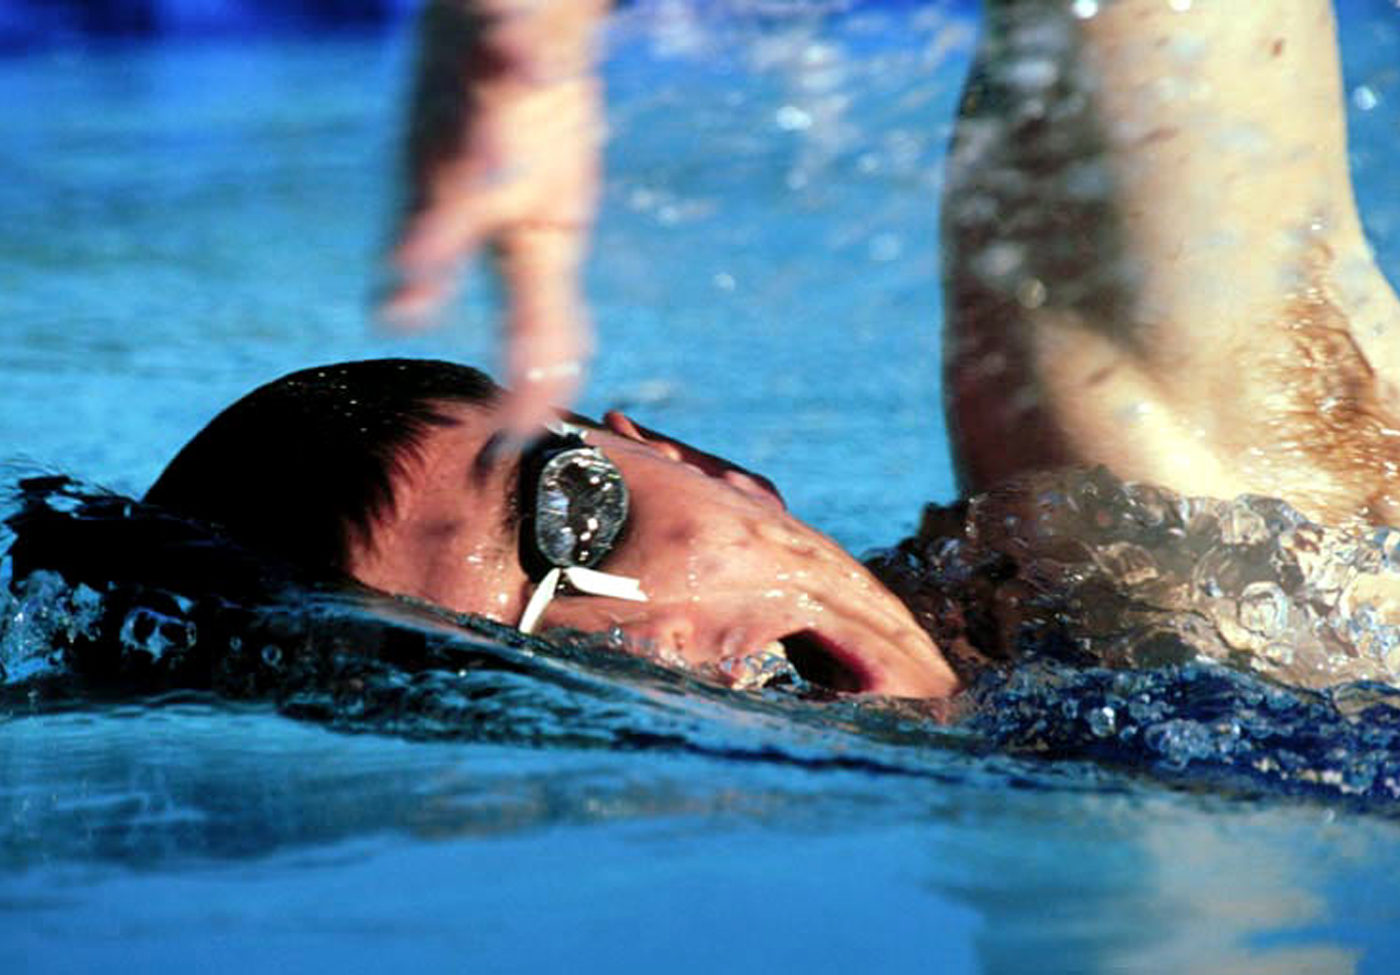 A public domain close-up photo of a swimmer from Wikimedia Commons.